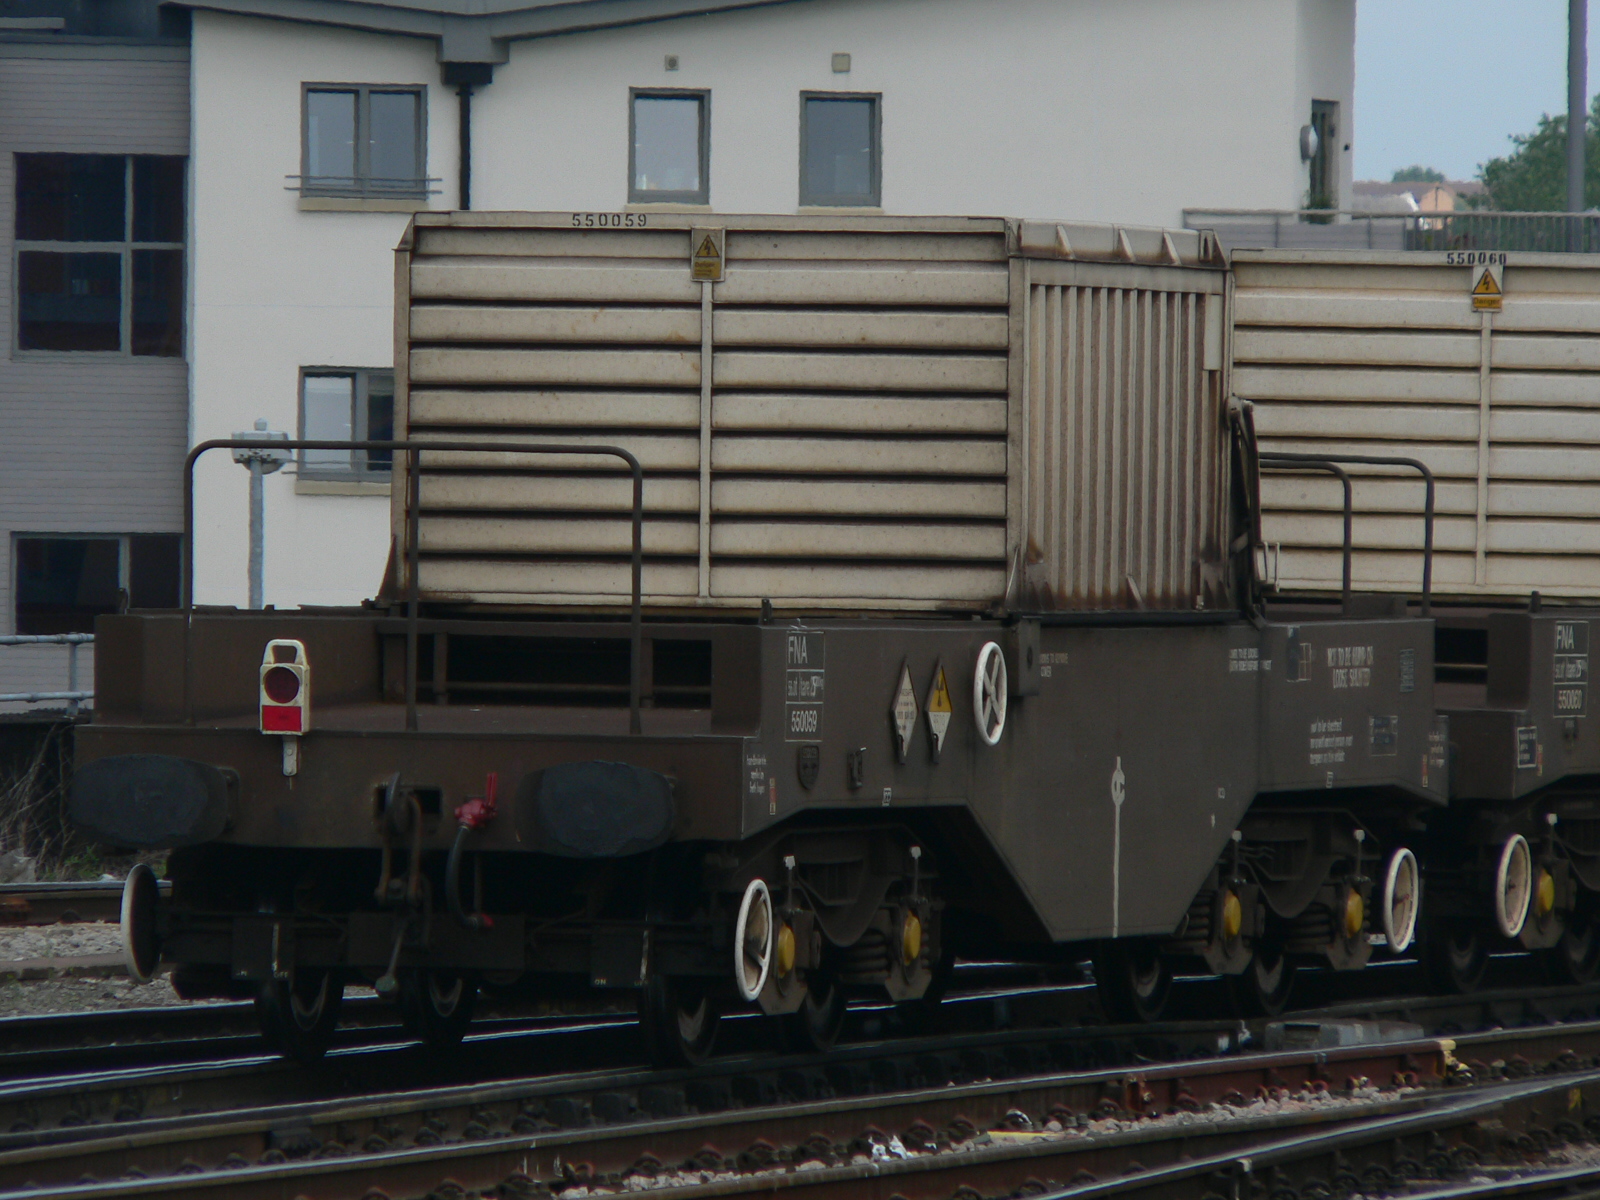 One wagon of a nuclear waste flask train being hauled through Bristol Temple Meads railway station by Direct Rail Services Class 37 diesel locomotives 37612 and 37069 en-route from Hinkley Point Power Station to Sellafield.